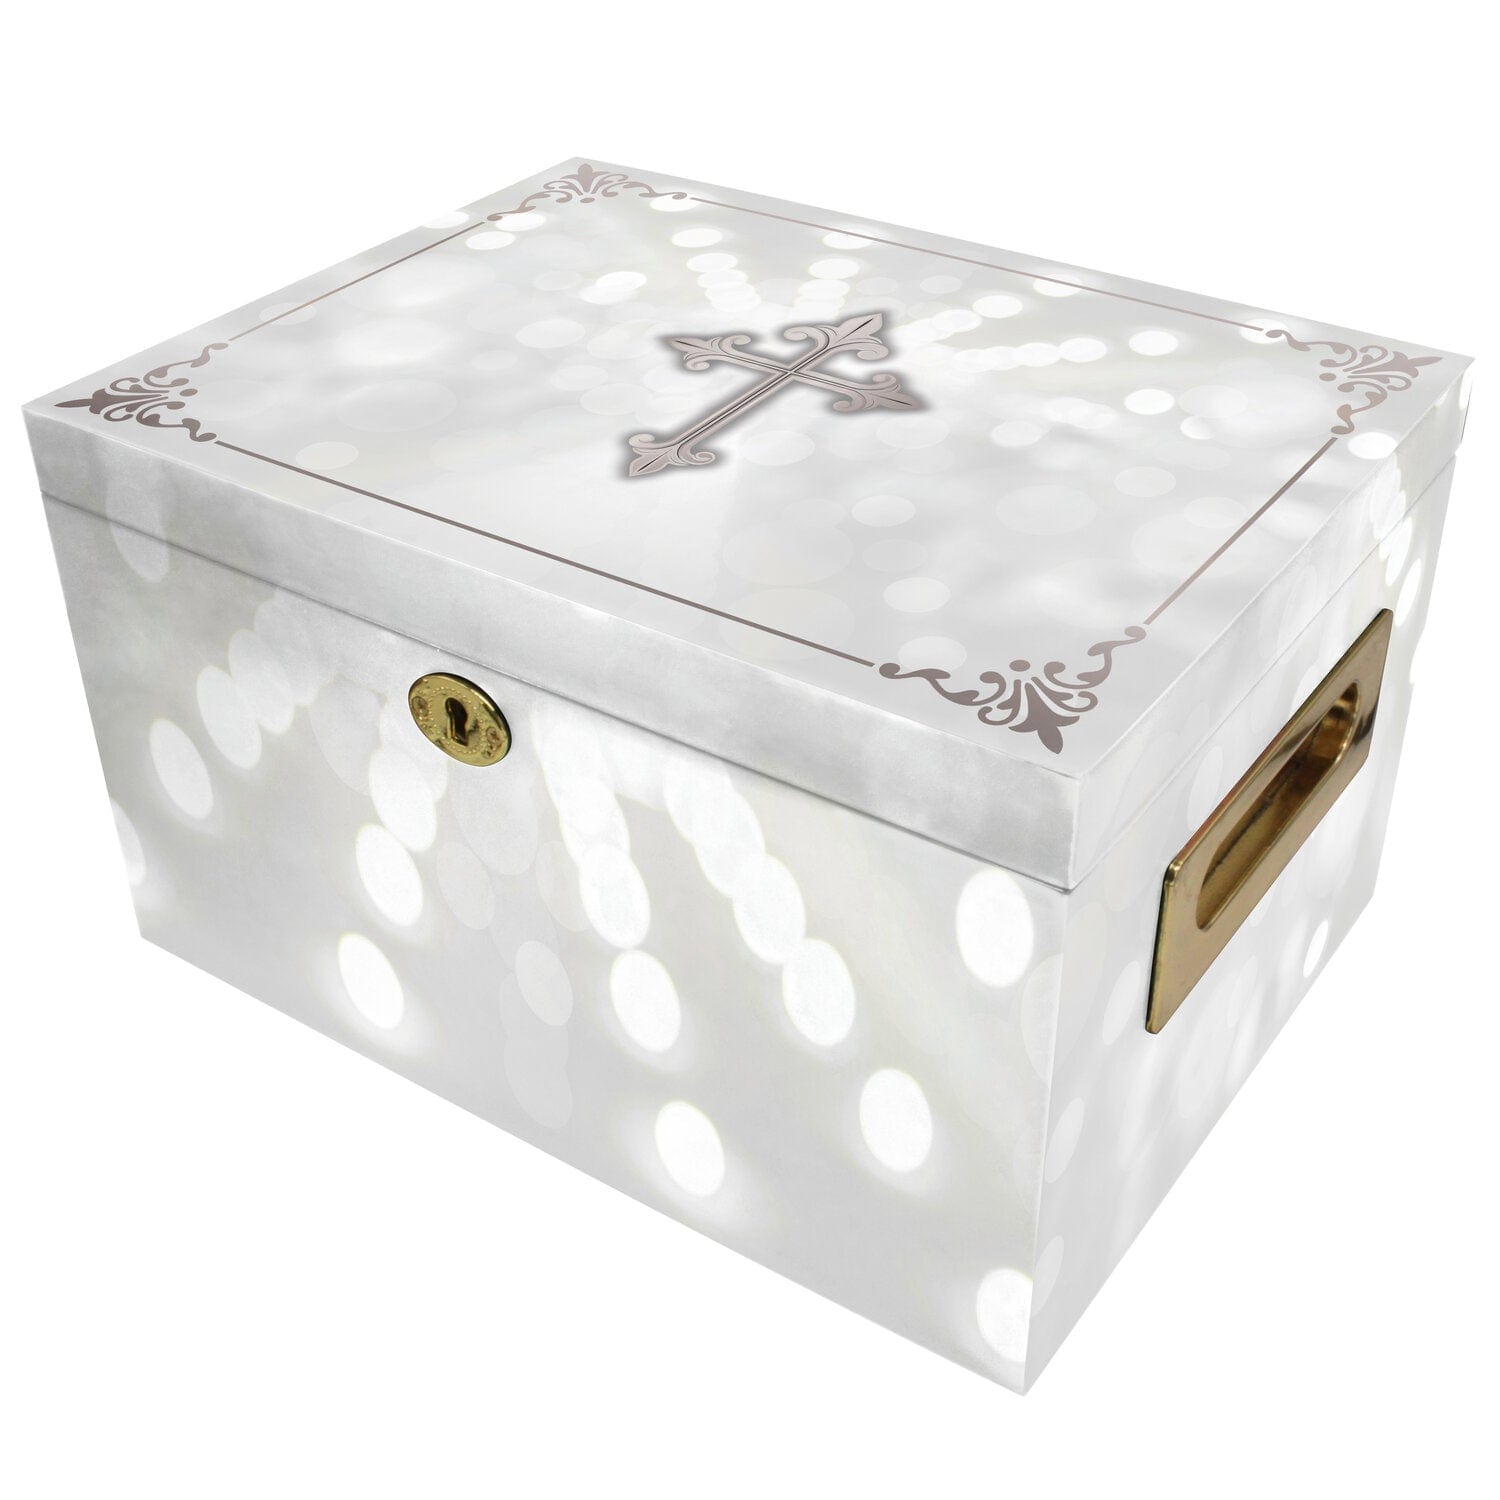 Commemorative Cremation Urns Urn Collection Chest Shining His Light (Silver) Memorial Collection Chest Cremation Urn